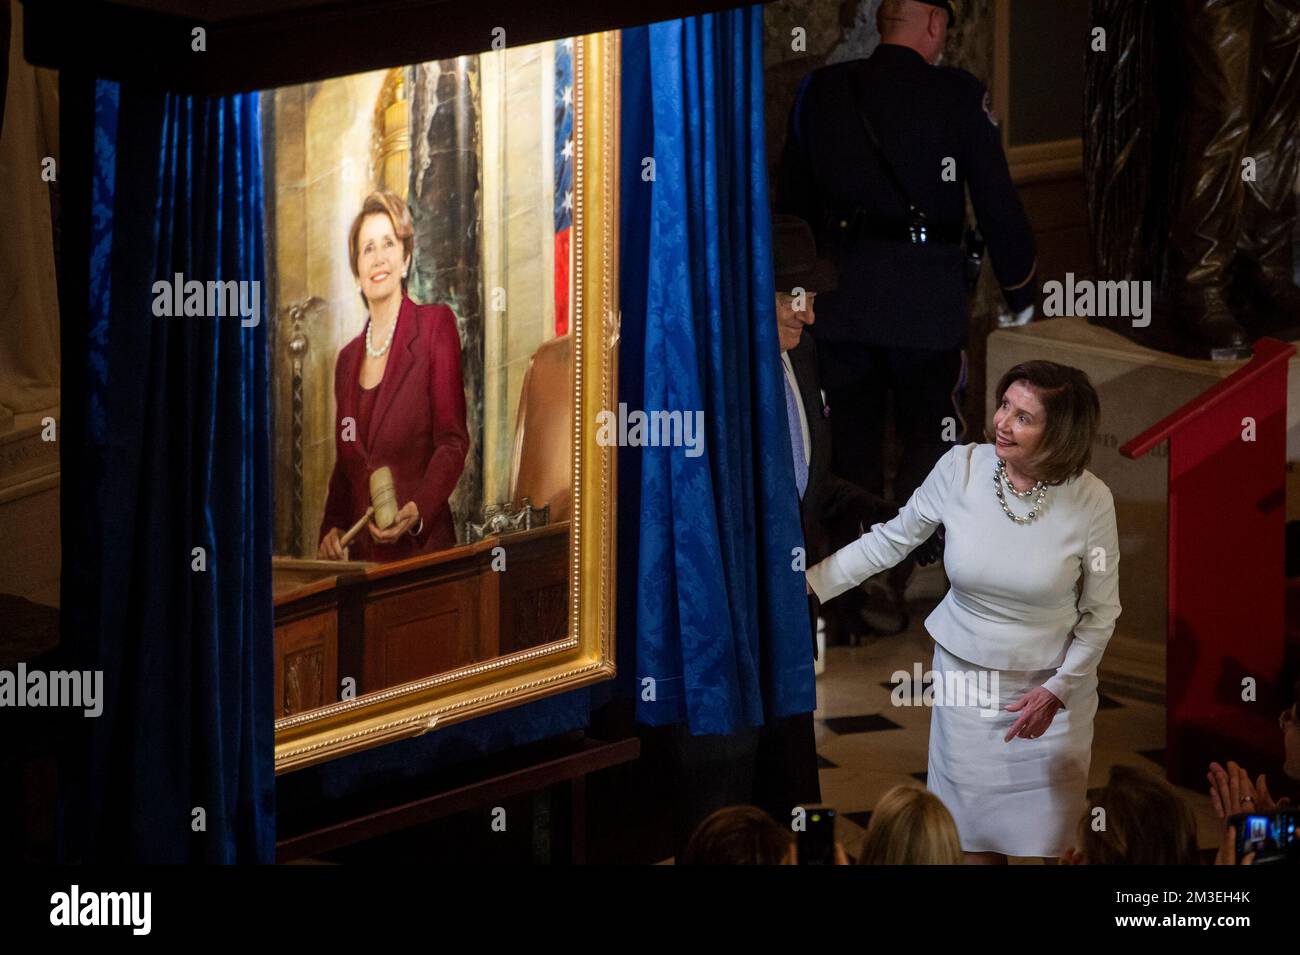 Speaker of the United States House of Representatives Nancy Pelosi (Democrat of California) is joined by her husband Paul Pelosi as she draws back the curtain to unveil her official portrait in Statuary Hall at the US Capitol in Washington, DC, USA, Wednesday, December 14, 2022. Photo by Rod Lamkey/CNP/ABACAPRESS.COM Stock Photo